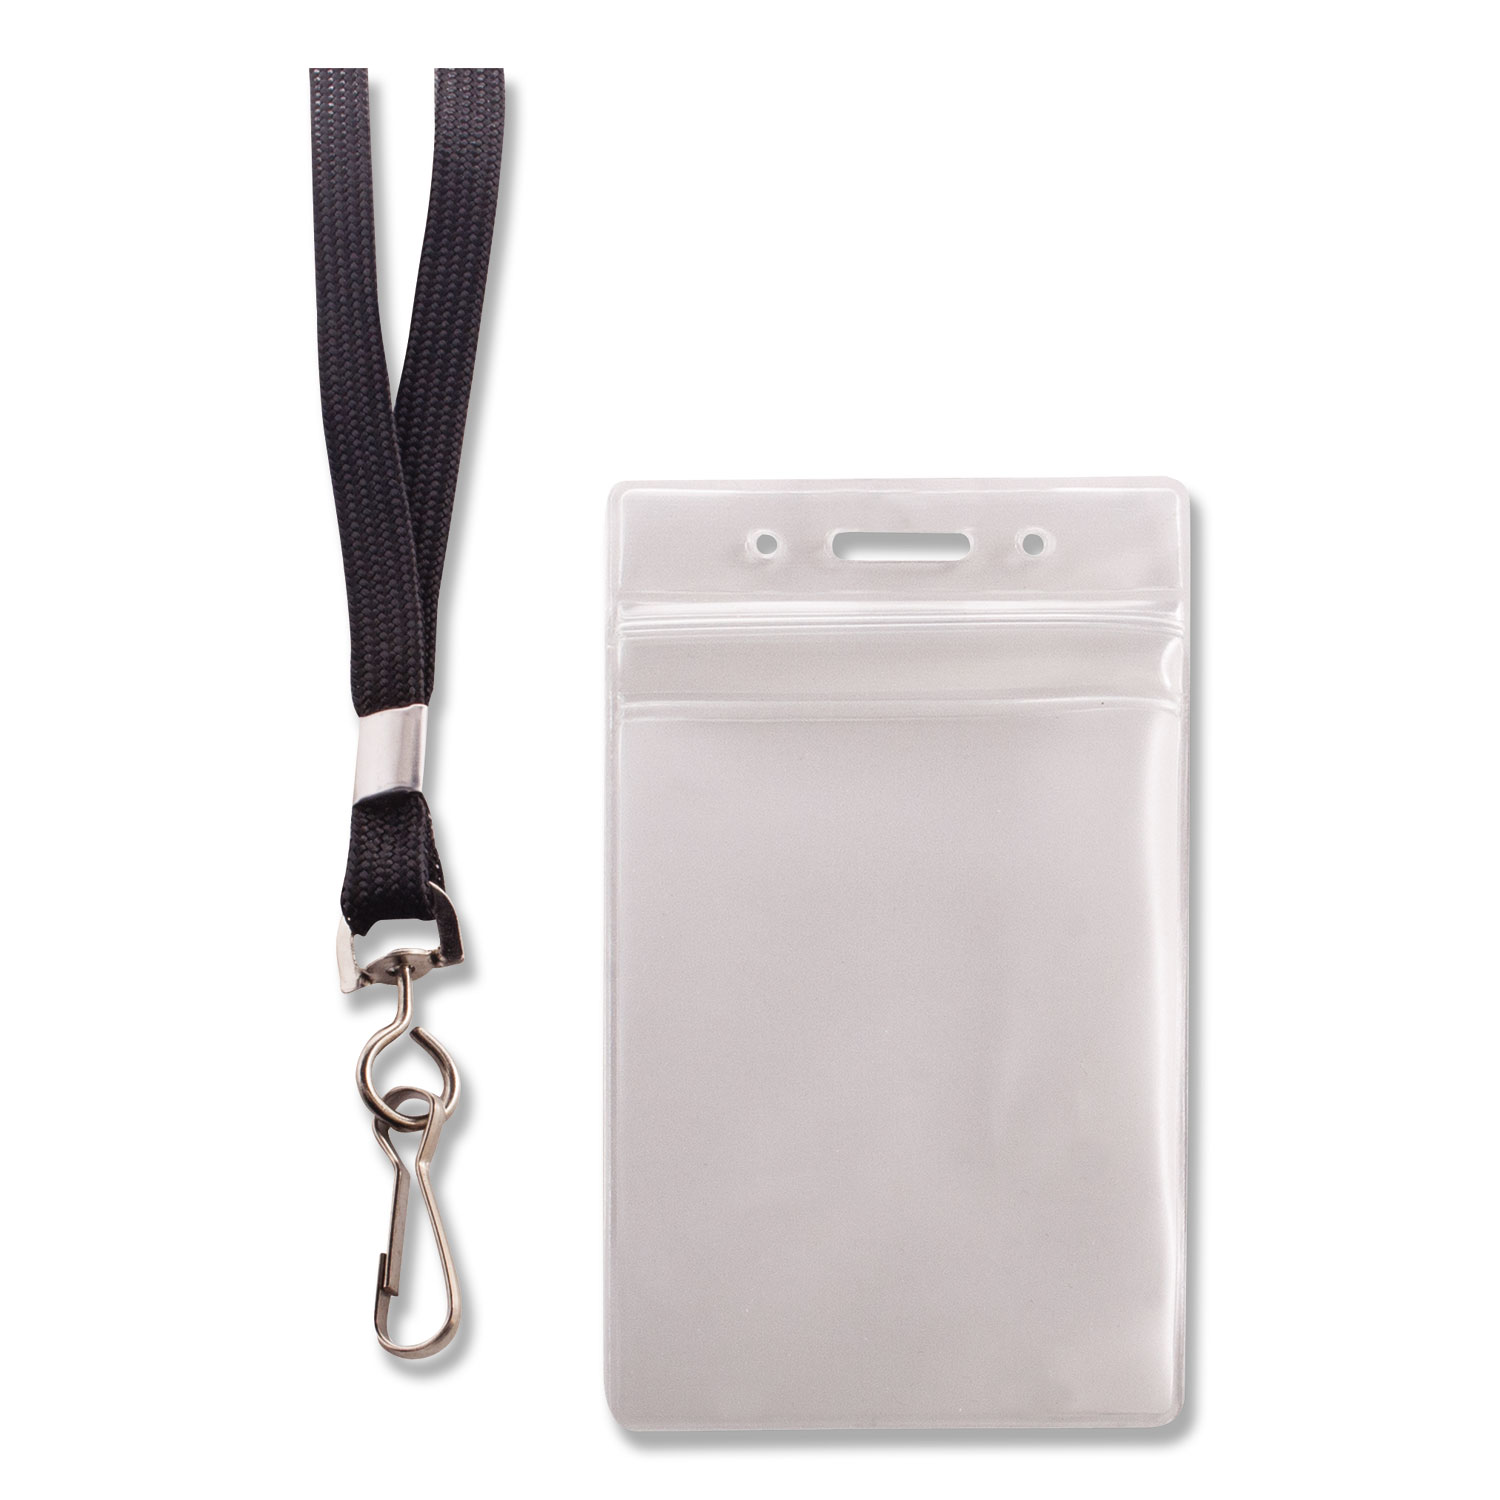 Details about   Retractable Lanyards ID Badge Holder Leather Cover Holder Strap Card holder JNJN 